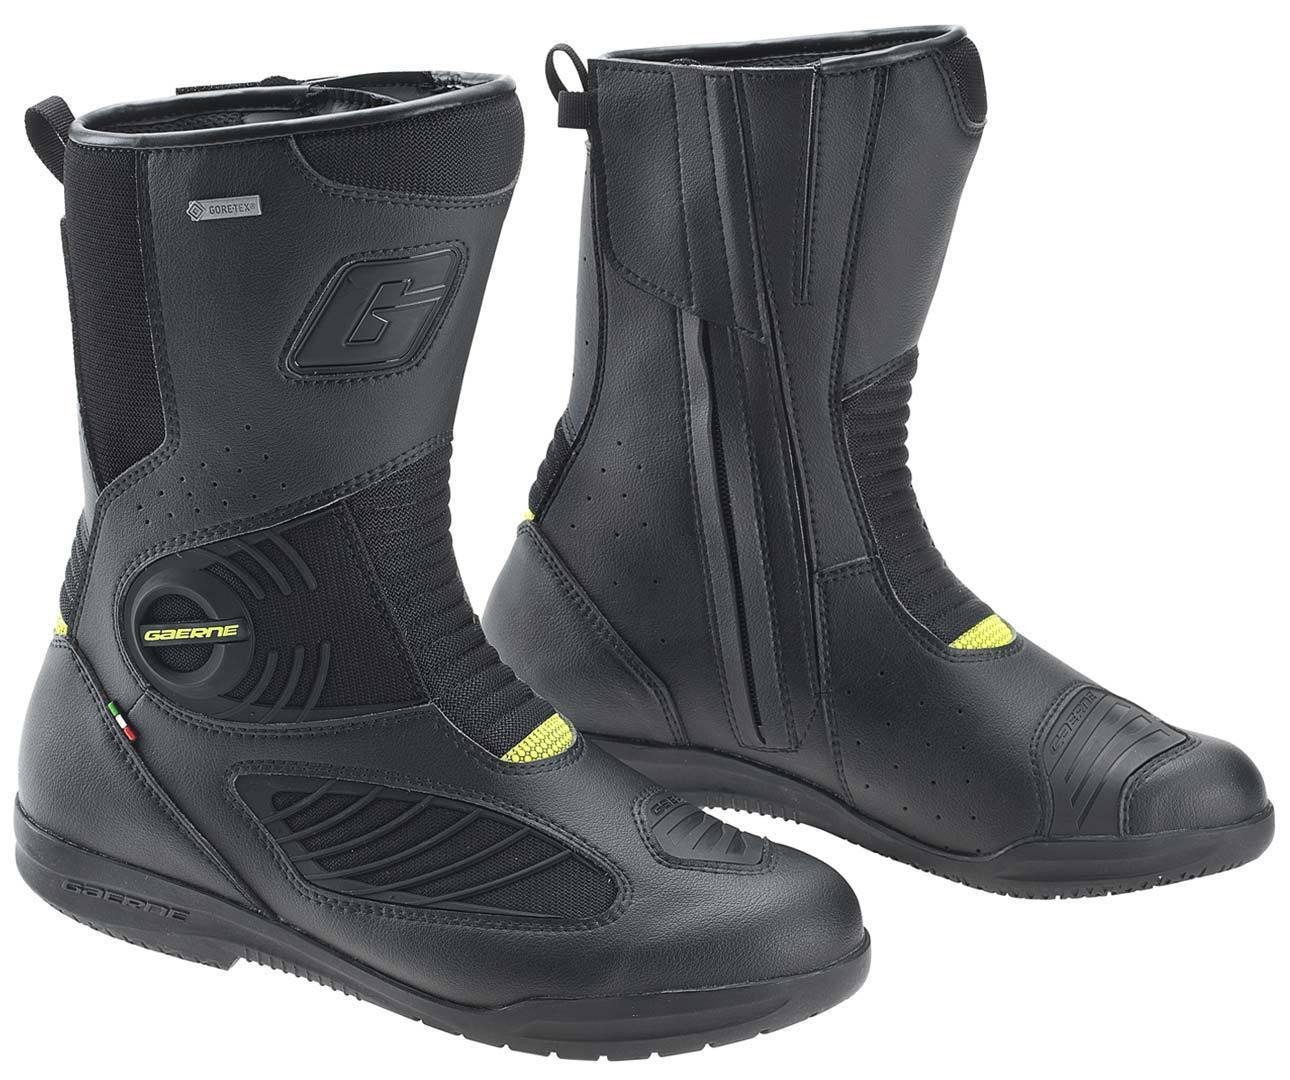 Motorcycles & accessories Gaerne G.Air Gore-Tex Motorcycle Boots, black, Size 43, black, Size 43